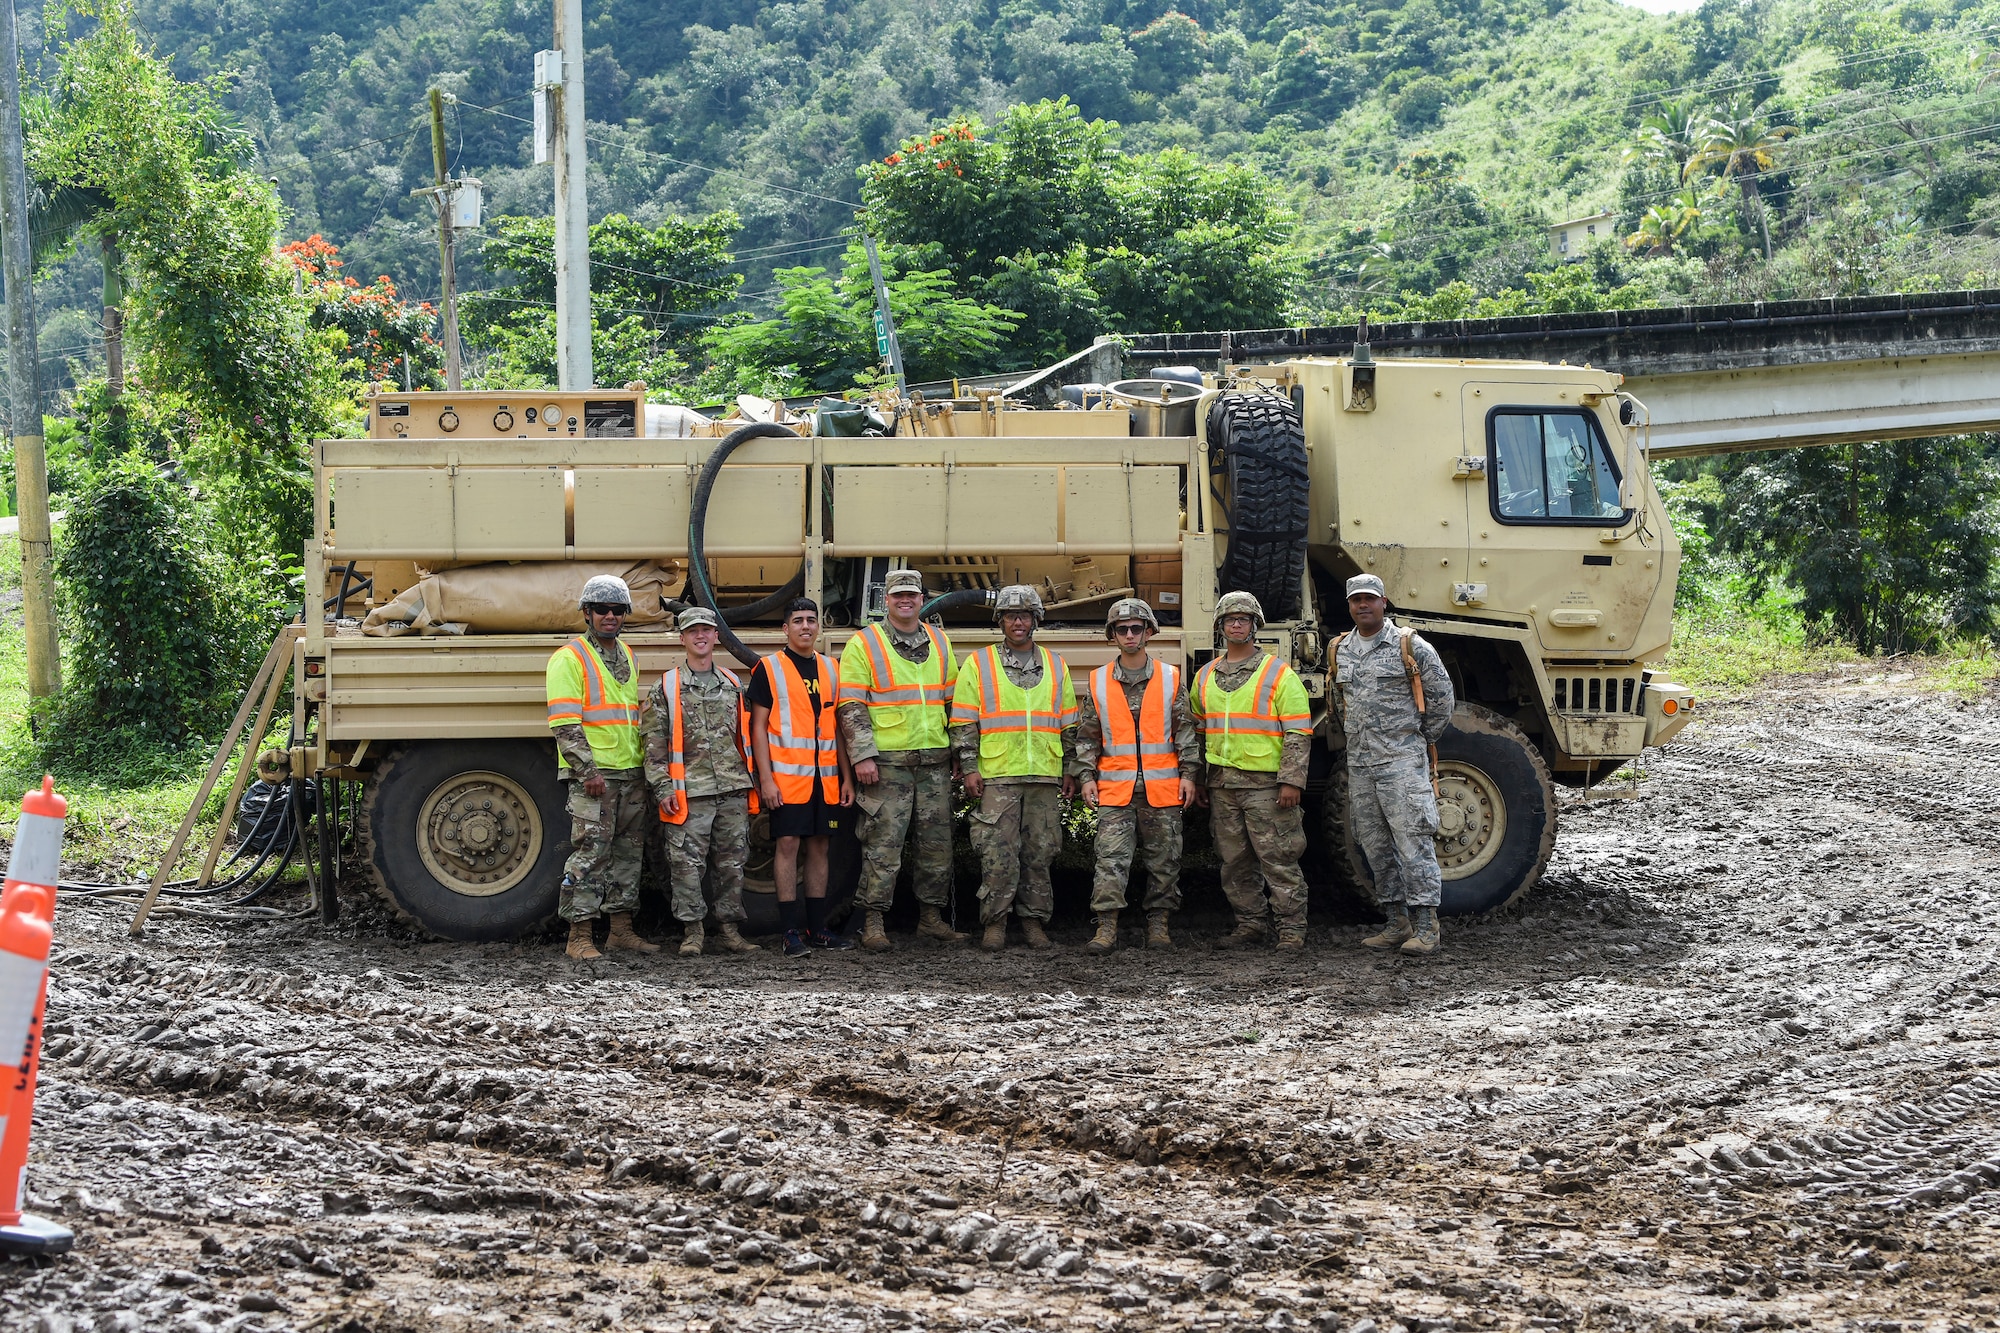 U.S. Air Force Airmen, assigned to the 156th Wing, Puerto Rico Air National Guard, and U.S. Army Soldiers, assigned to the 482nd Chemical Company, Puerto Rico National Guard, pose in front of a vehicle near Rio de la Plata, Puerto Rico, Dec. 27, 2019. Members of the Puerto Rico National Guard were activated to support state and federal operations working to stabilize the vegetation debris fire that has been burning underground in Cayey, Puerto Rico, since Nov. 28, 2019. (U.S. Air National Guard photo by Master Sgt. Caycee Watson)